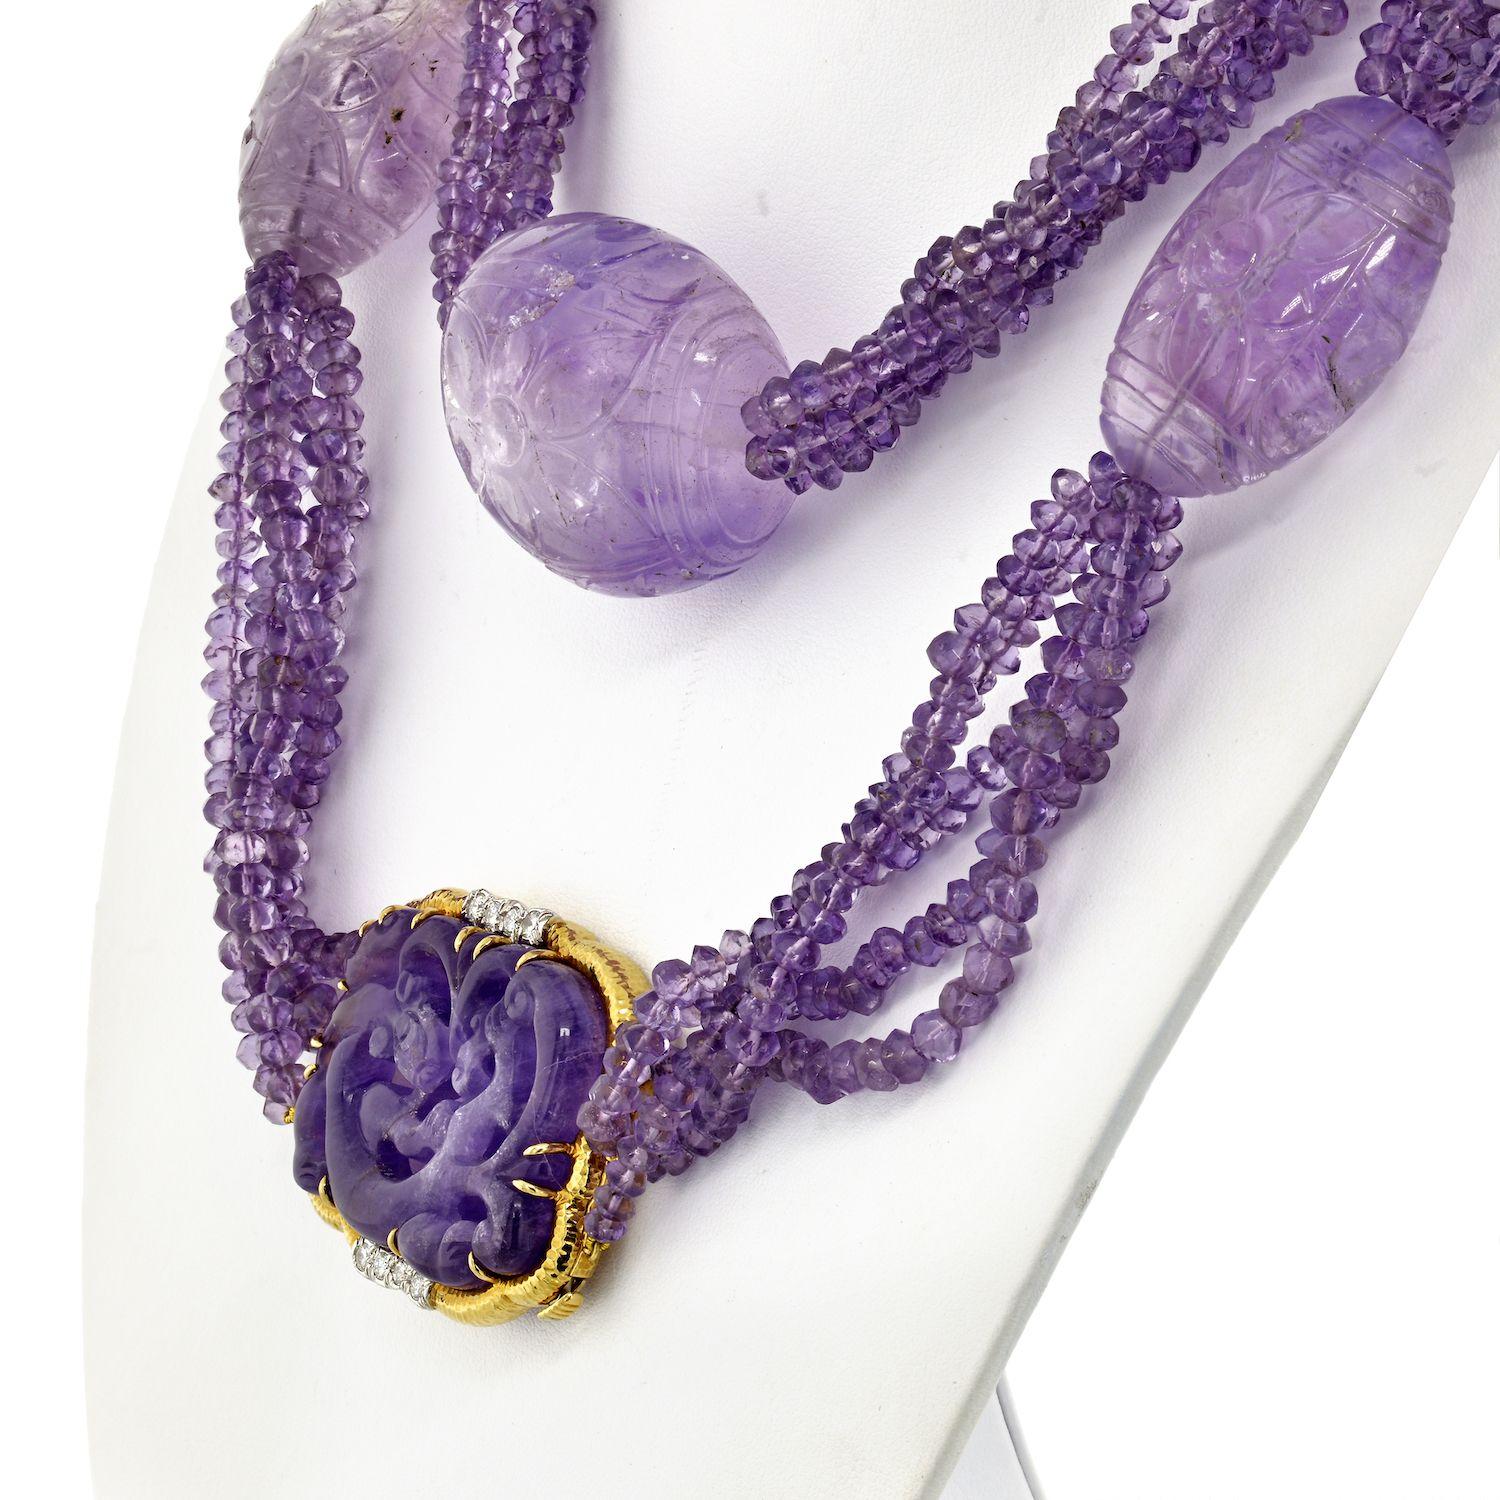 This is an impressive David Webb Lavender color Amethyst bead necklace. Composed of 5 strands of amethysts featuring large egg shaped amethyst stations total of 7. Each large amethyst is about 4.5cm in length, and about 10cm in diameter.  
Inside